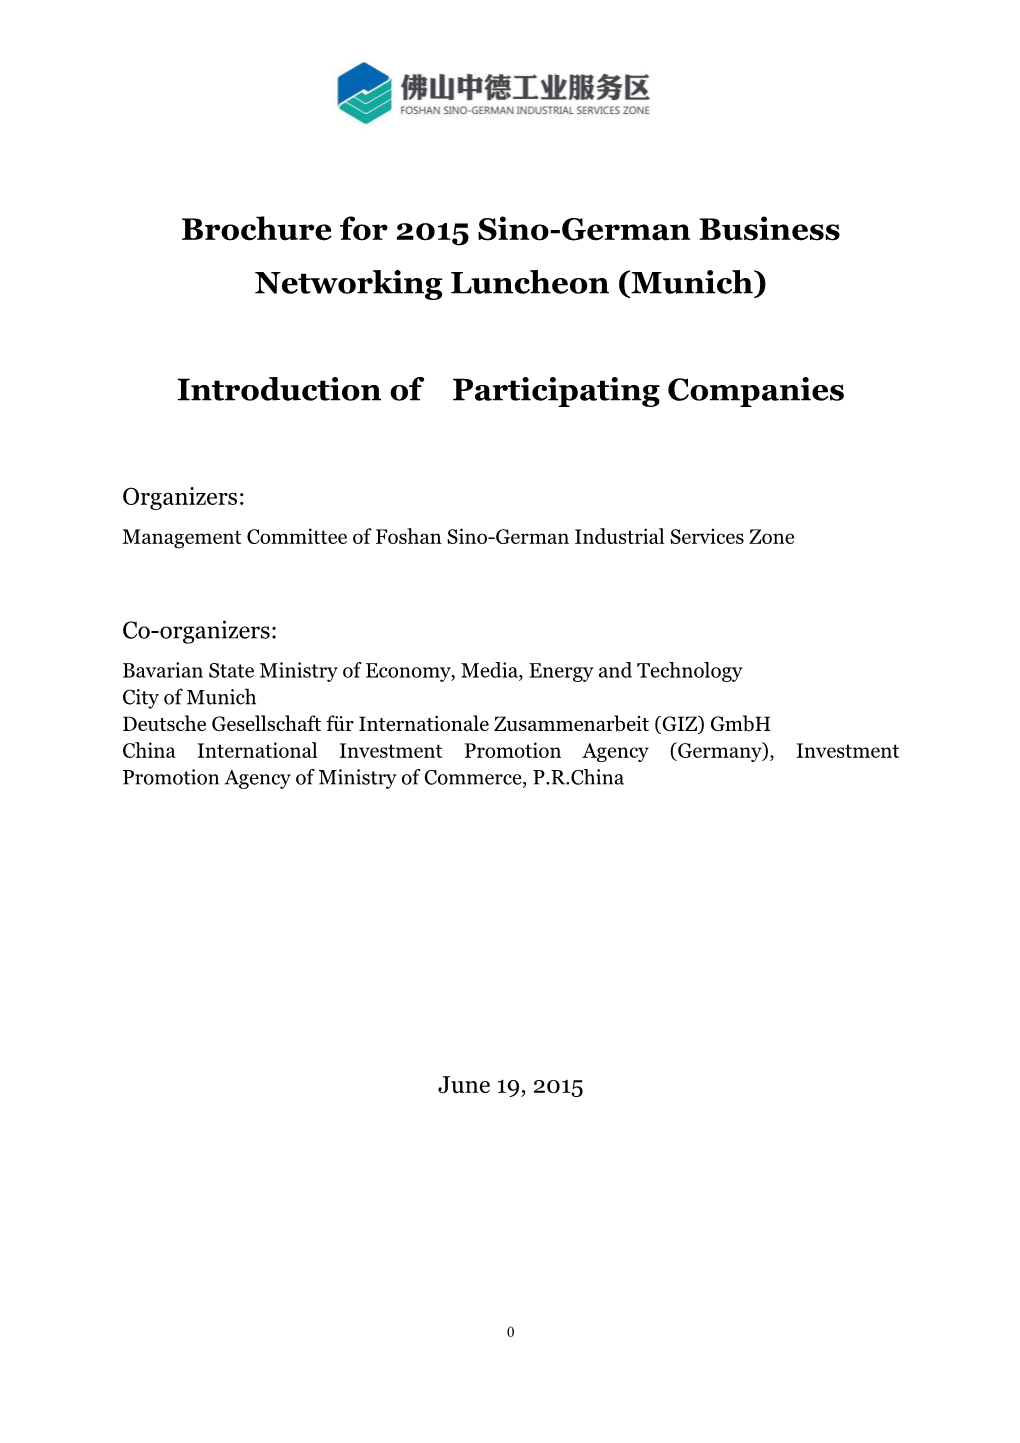 Introduction of Participating Companies